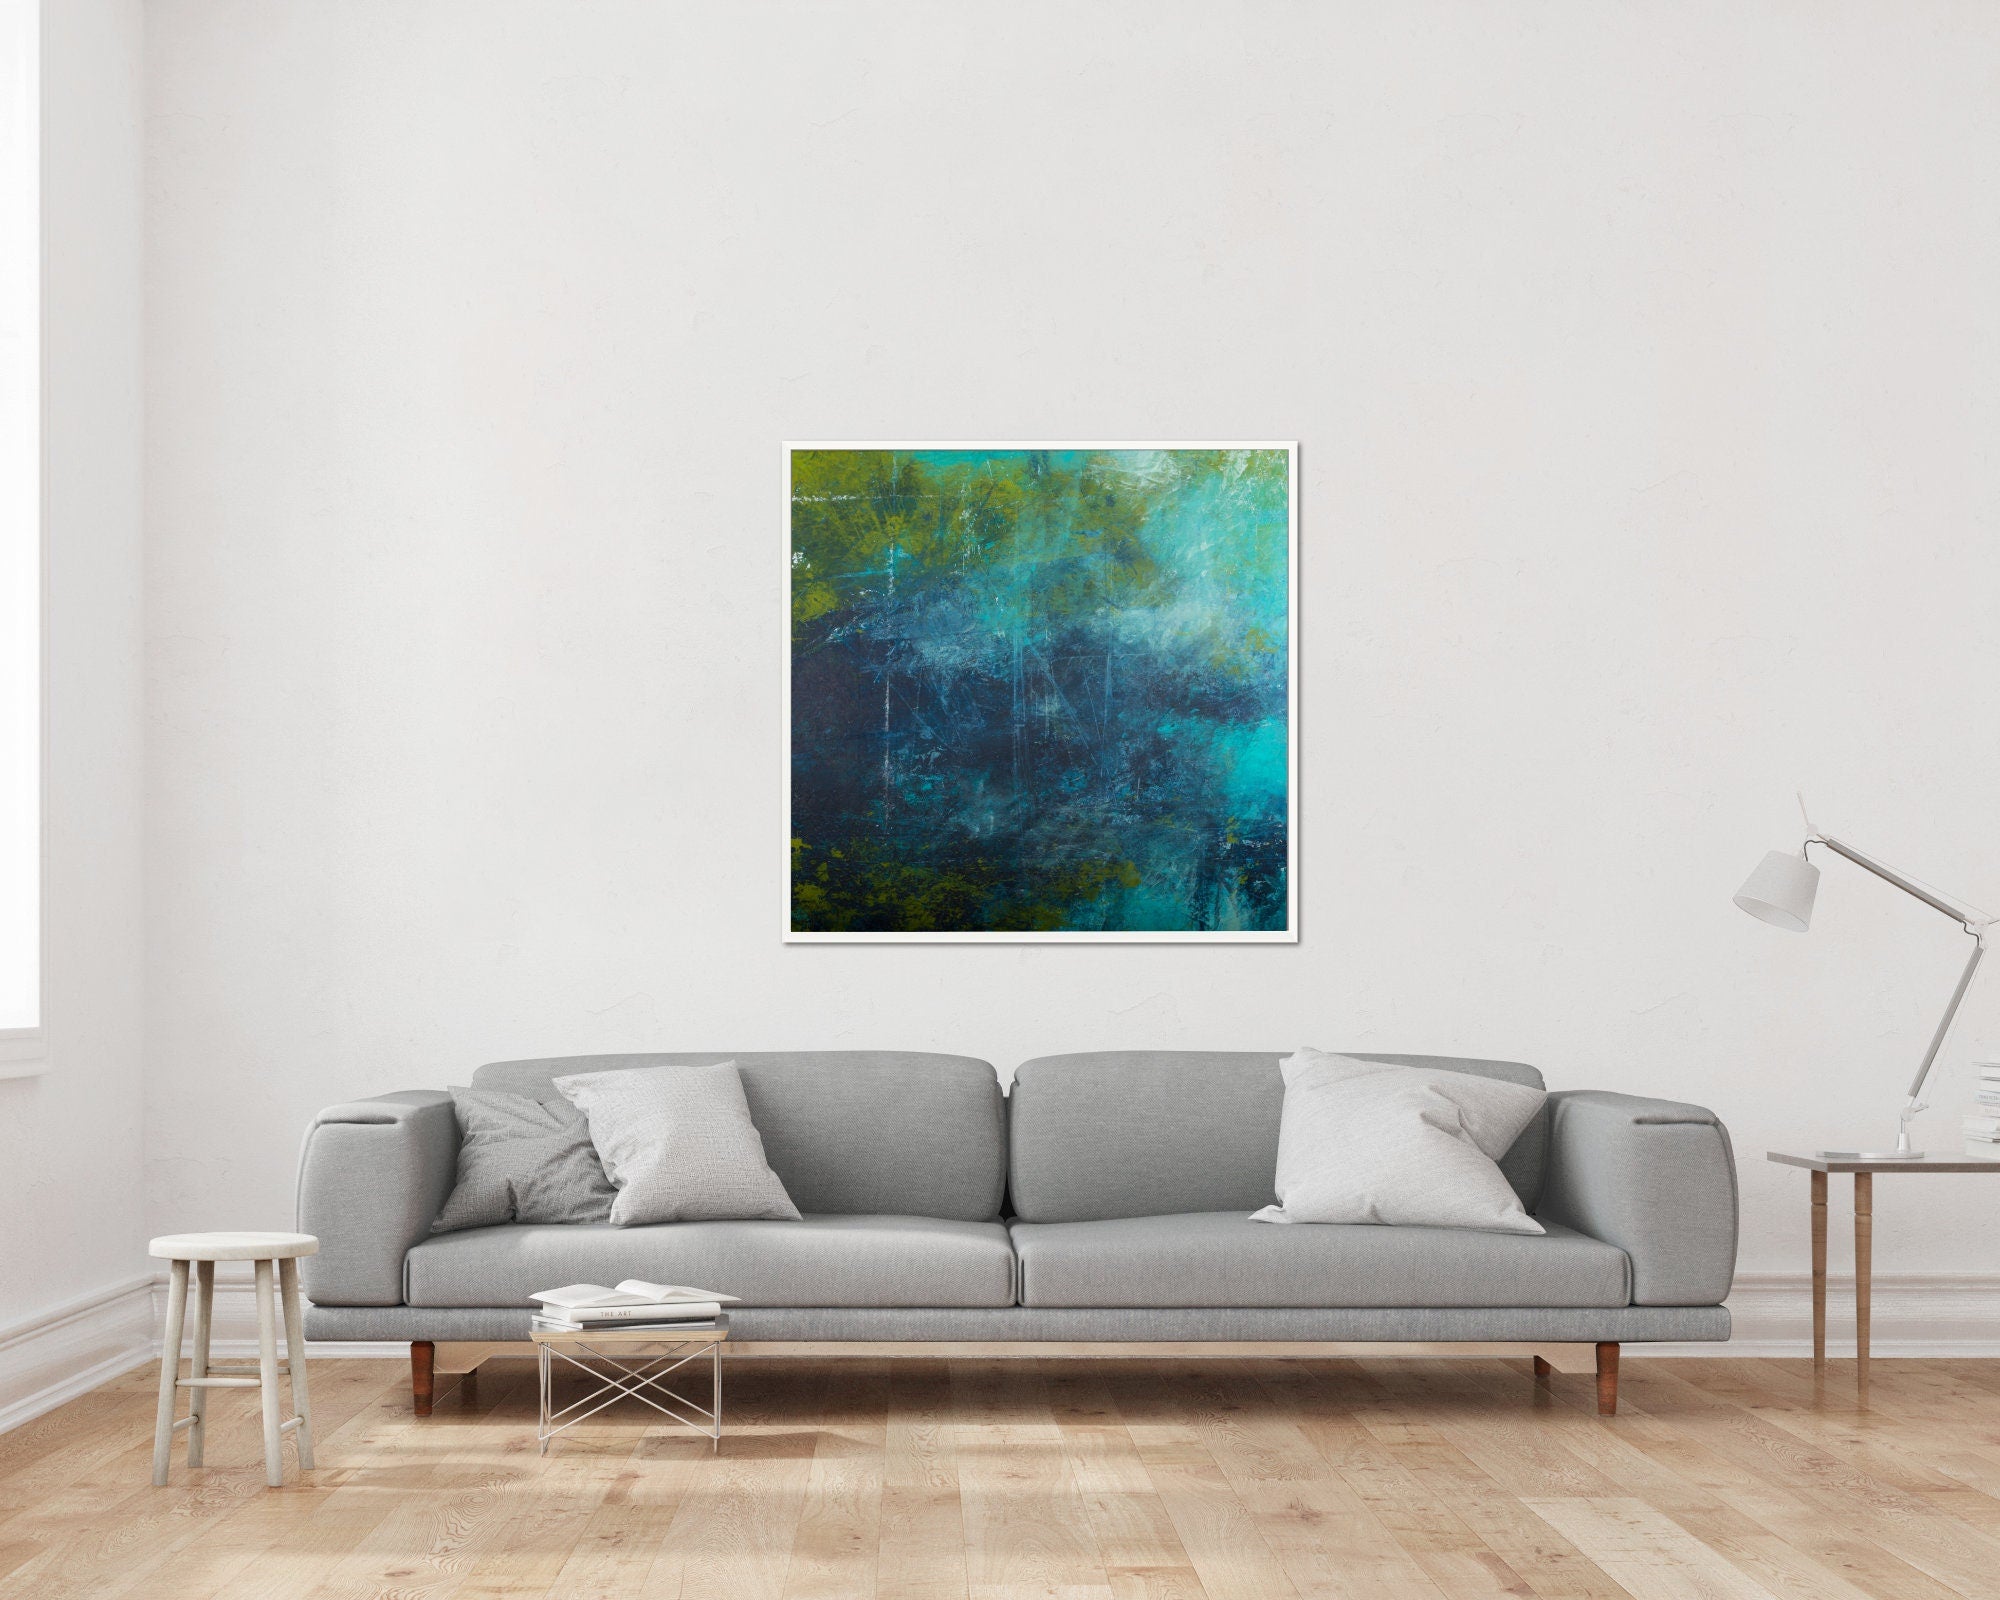 Teal extra large wall art, original abstract art painting on canvas, Teal green fine art, wall art canvas, Teal wall art